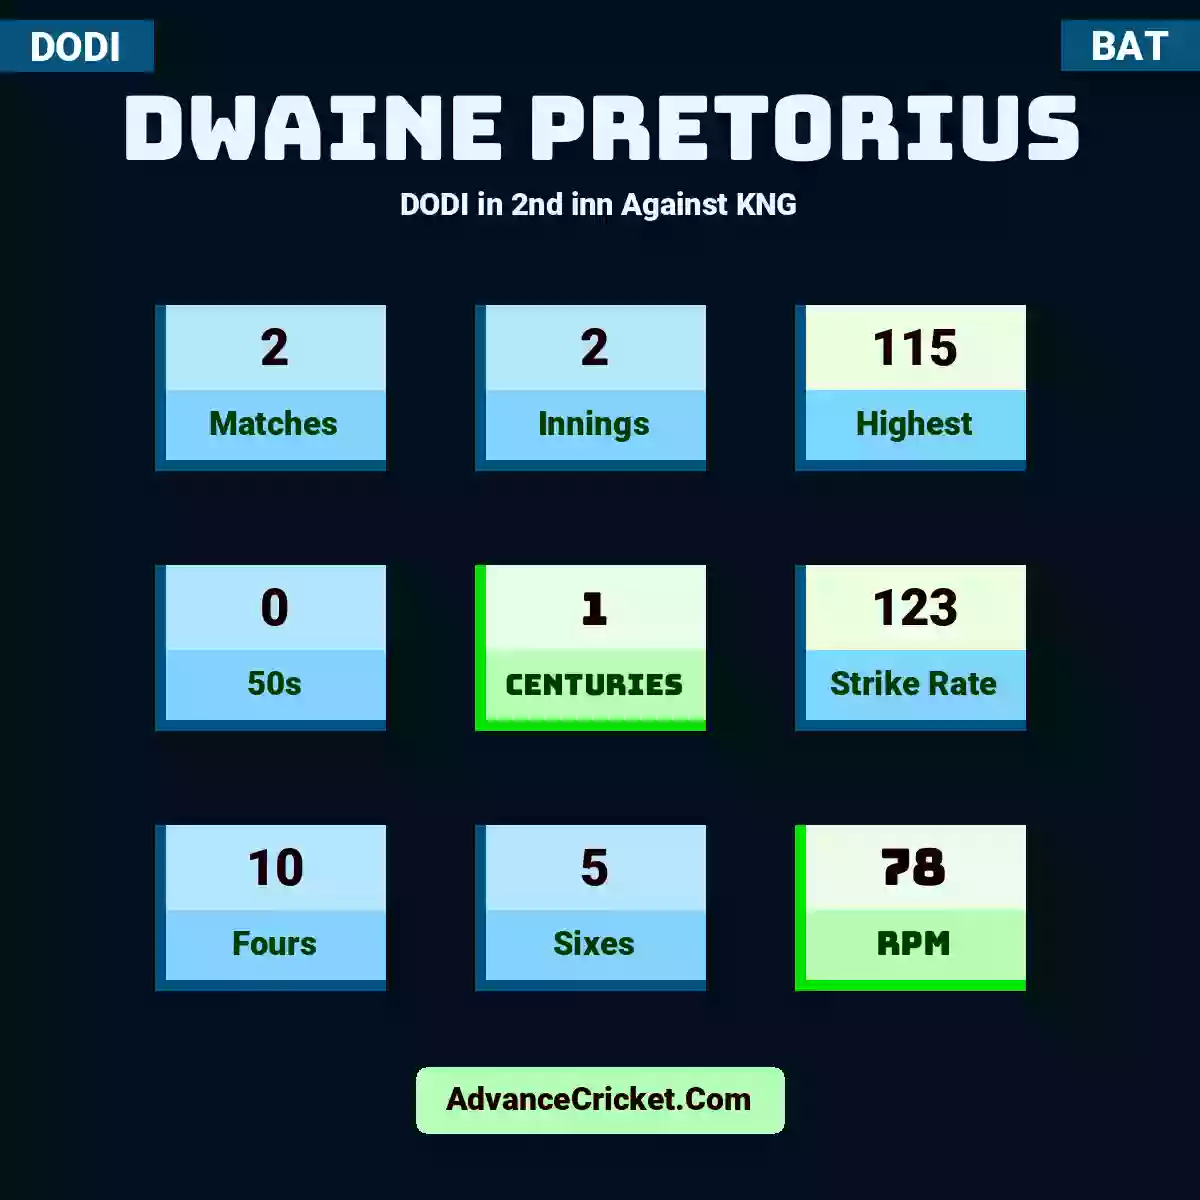 Dwaine Pretorius DODI  in 2nd inn Against KNG, Dwaine Pretorius played 2 matches, scored 115 runs as highest, 0 half-centuries, and 1 centuries, with a strike rate of 123. D.Pretorius hit 10 fours and 5 sixes, with an RPM of 78.